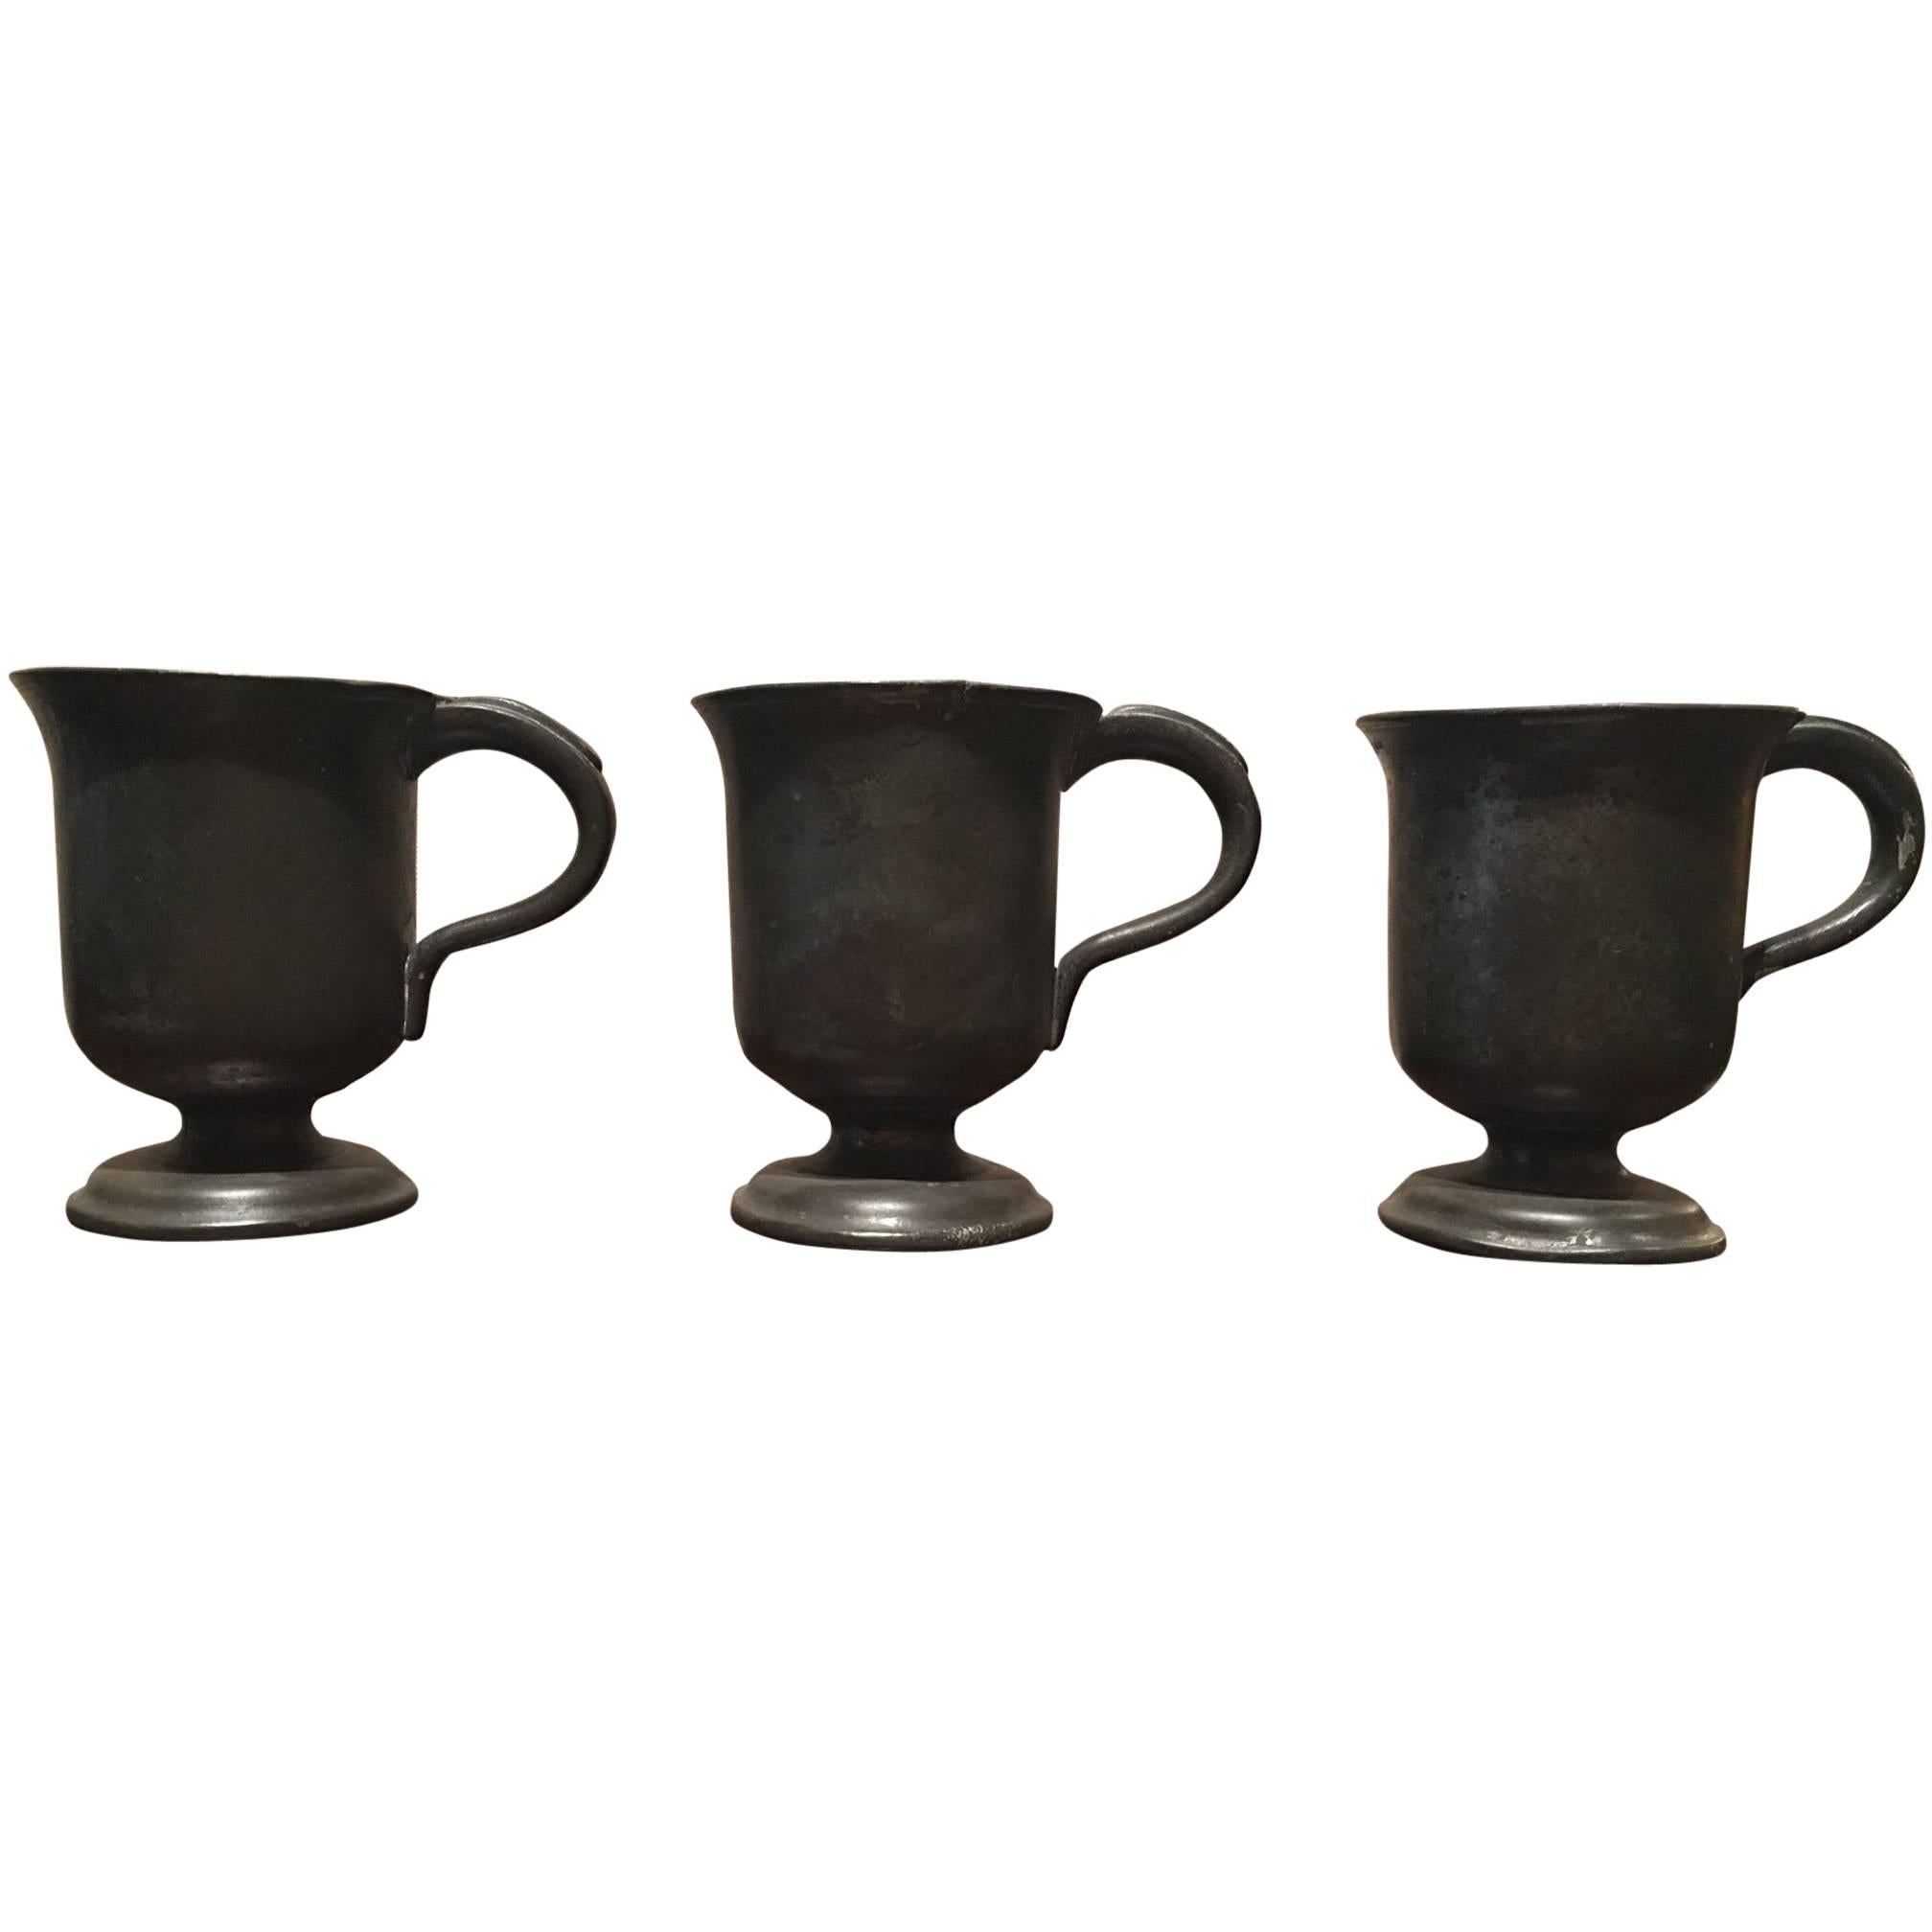 English Set of Three Pewter Footed Mugs or Cups, 19th Century For Sale